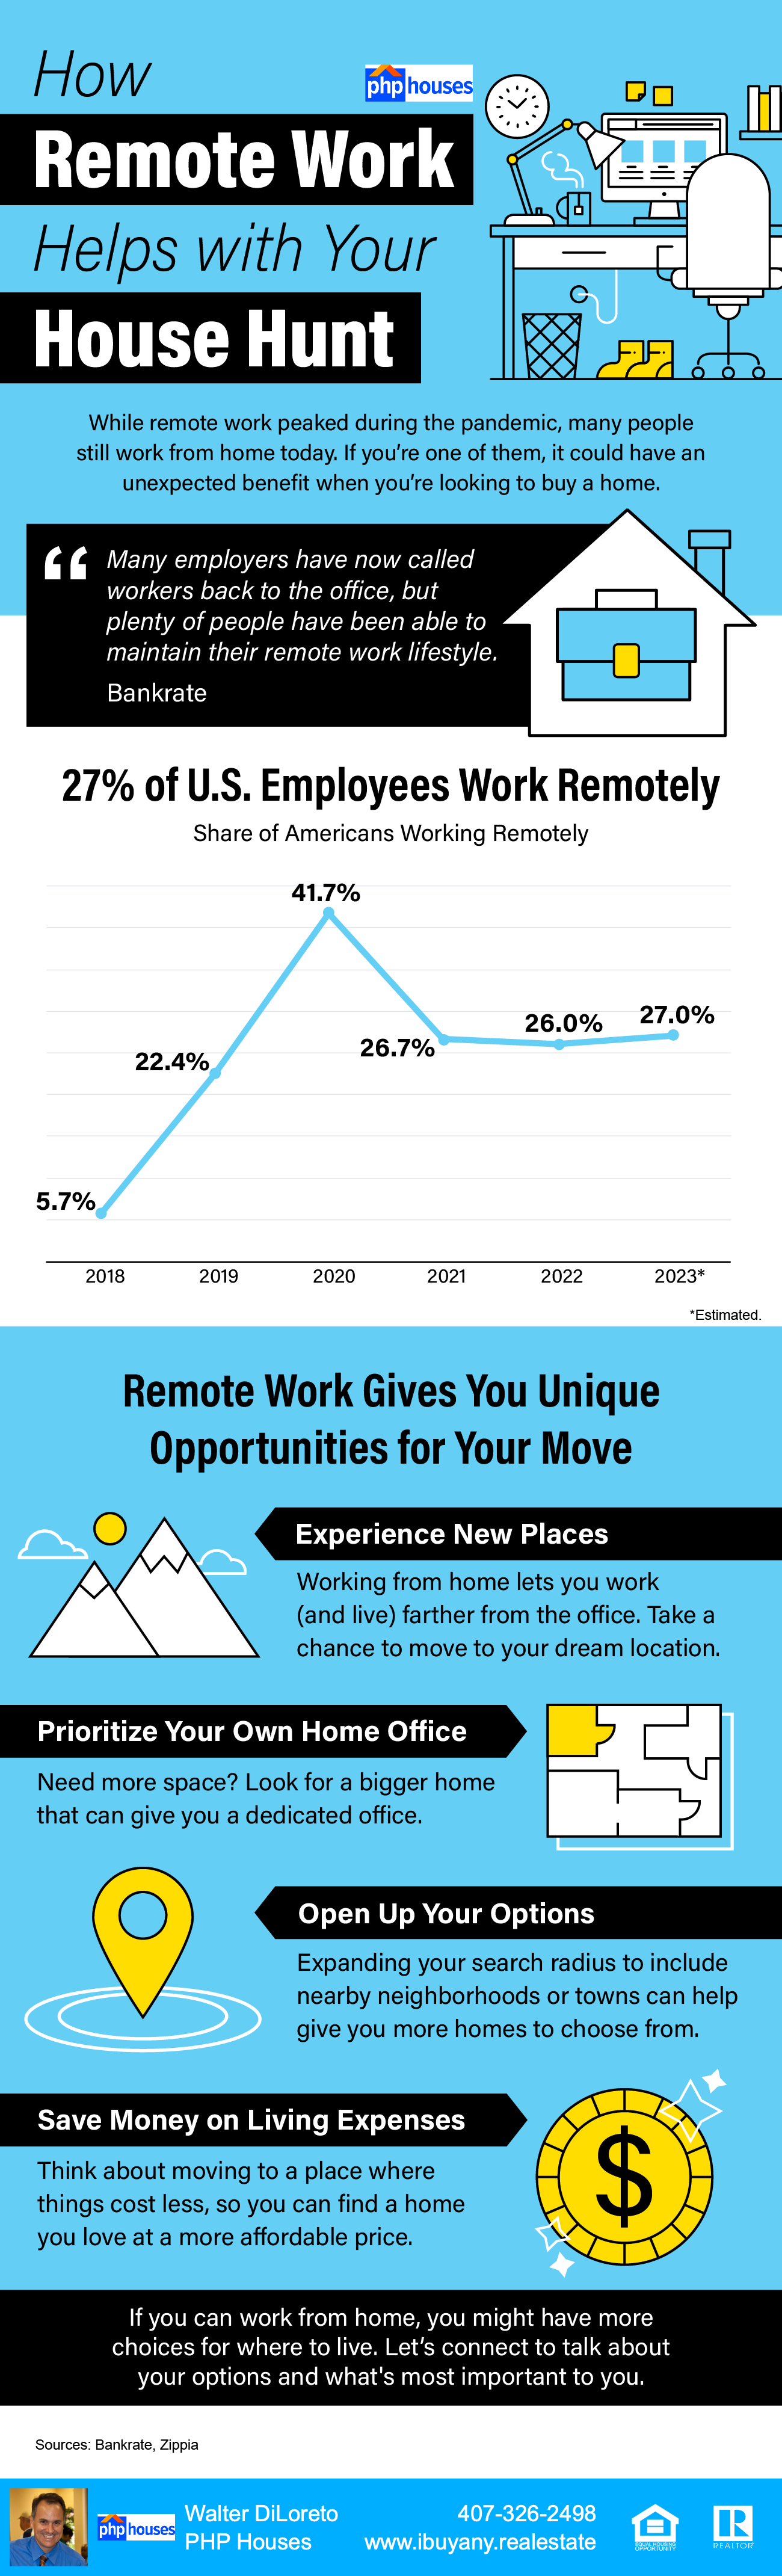 How-Remote-Work-Helps-with-Your-House-Hunt-MEM.png